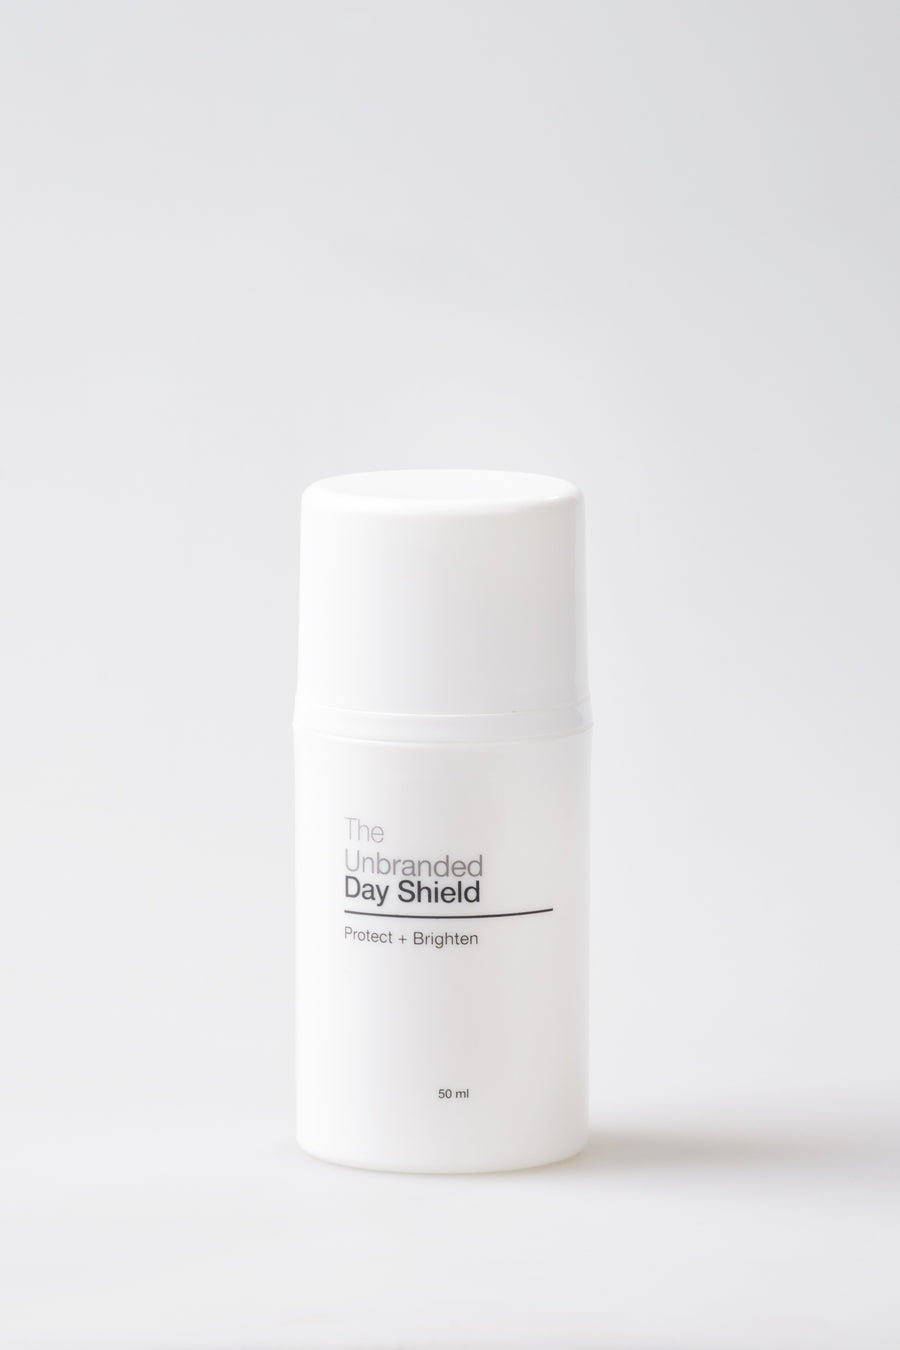 The Unbranded Day Shield 50ml